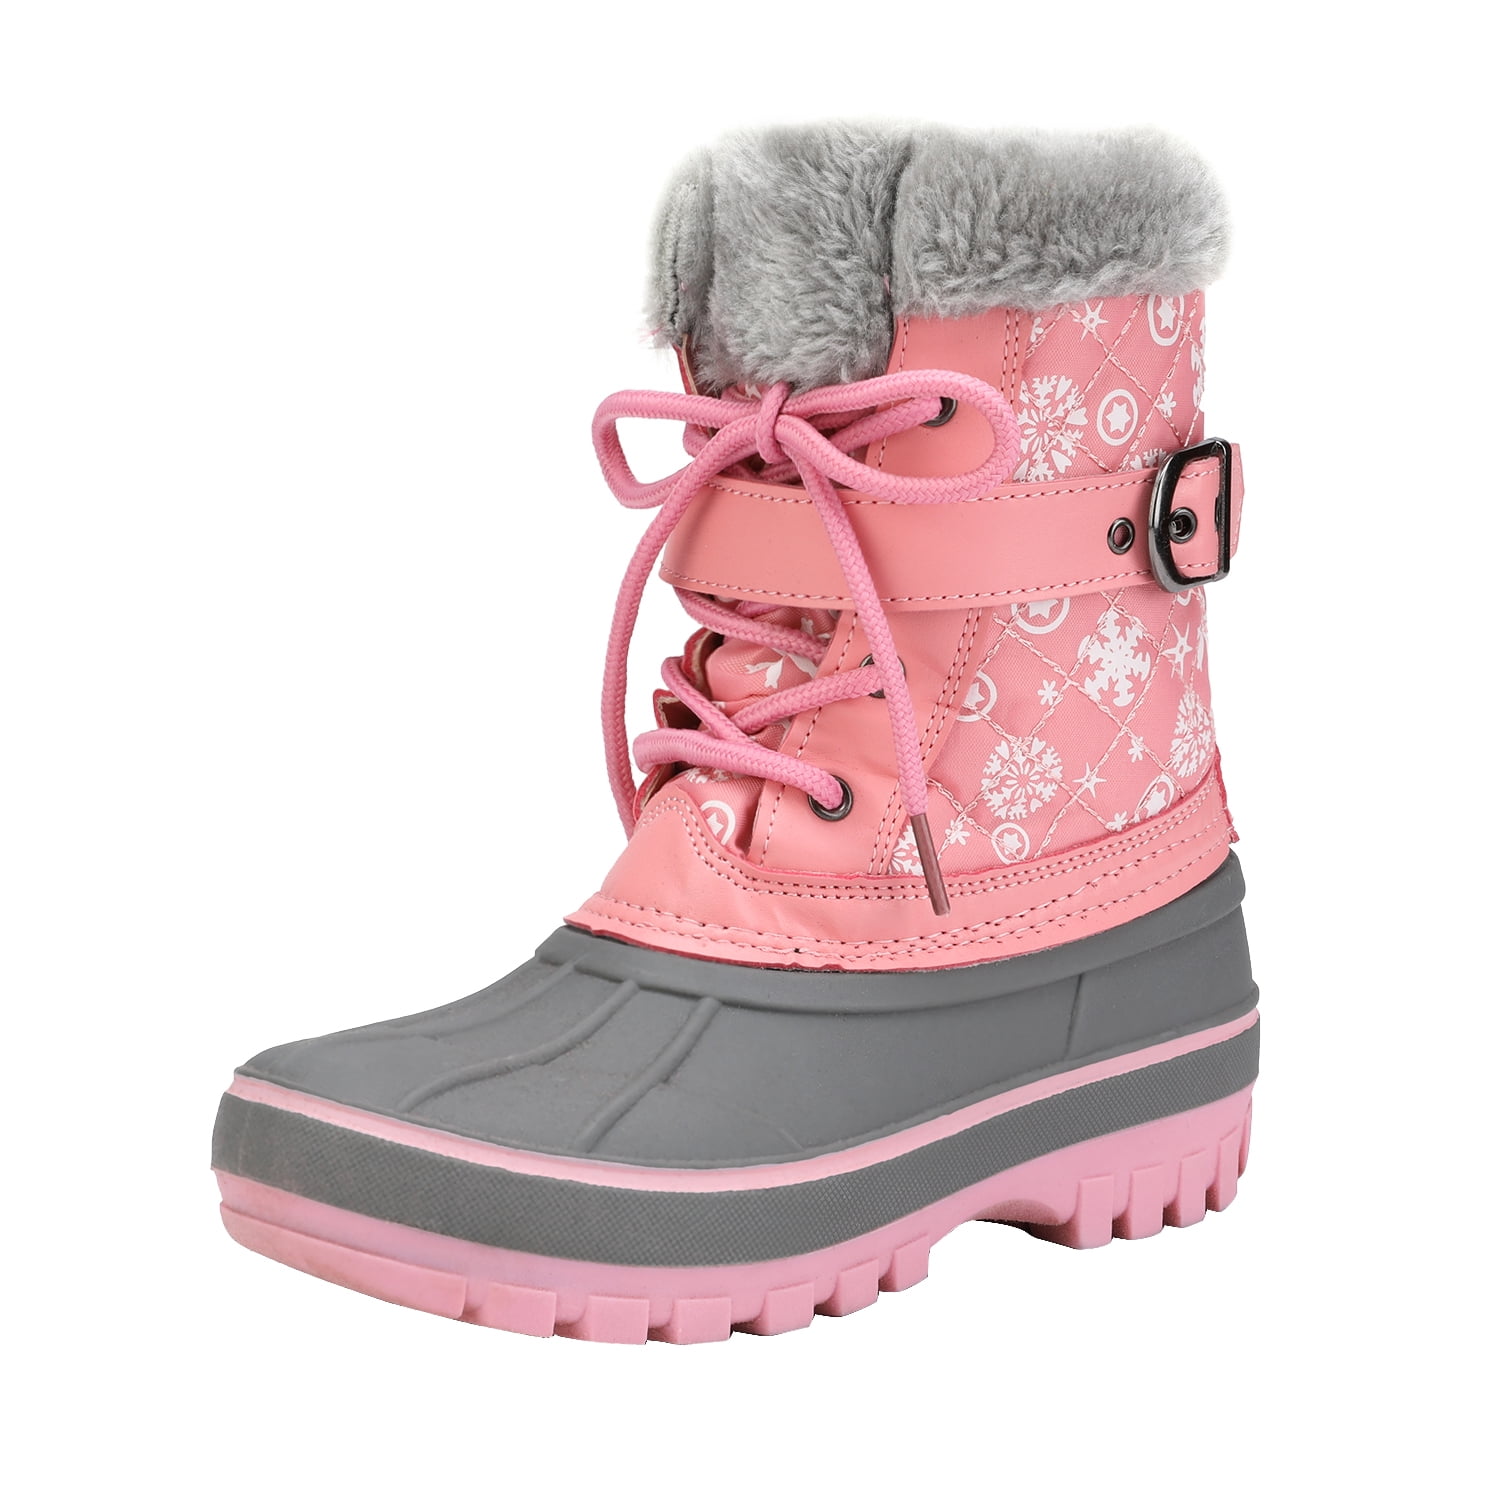 dumanfs Children Fashion Boys Girls Floral Print Winter Thick Snow Boots Waterproof Outdoor Side Zipper Casual Shoes Ankle Boots 12M-12T 